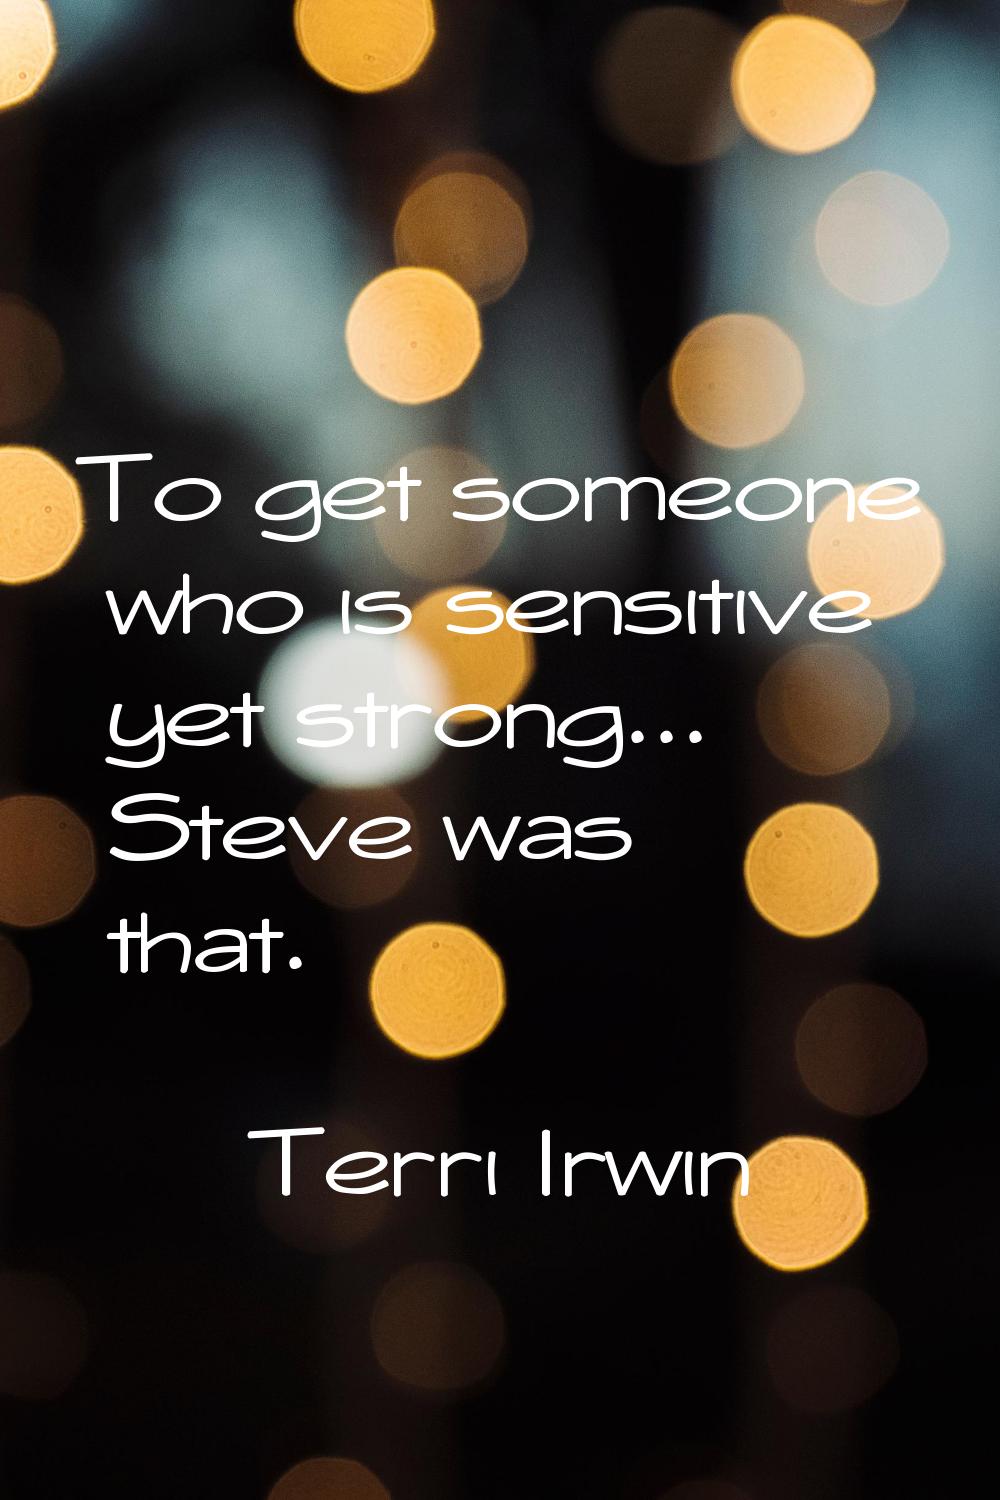 To get someone who is sensitive yet strong... Steve was that.